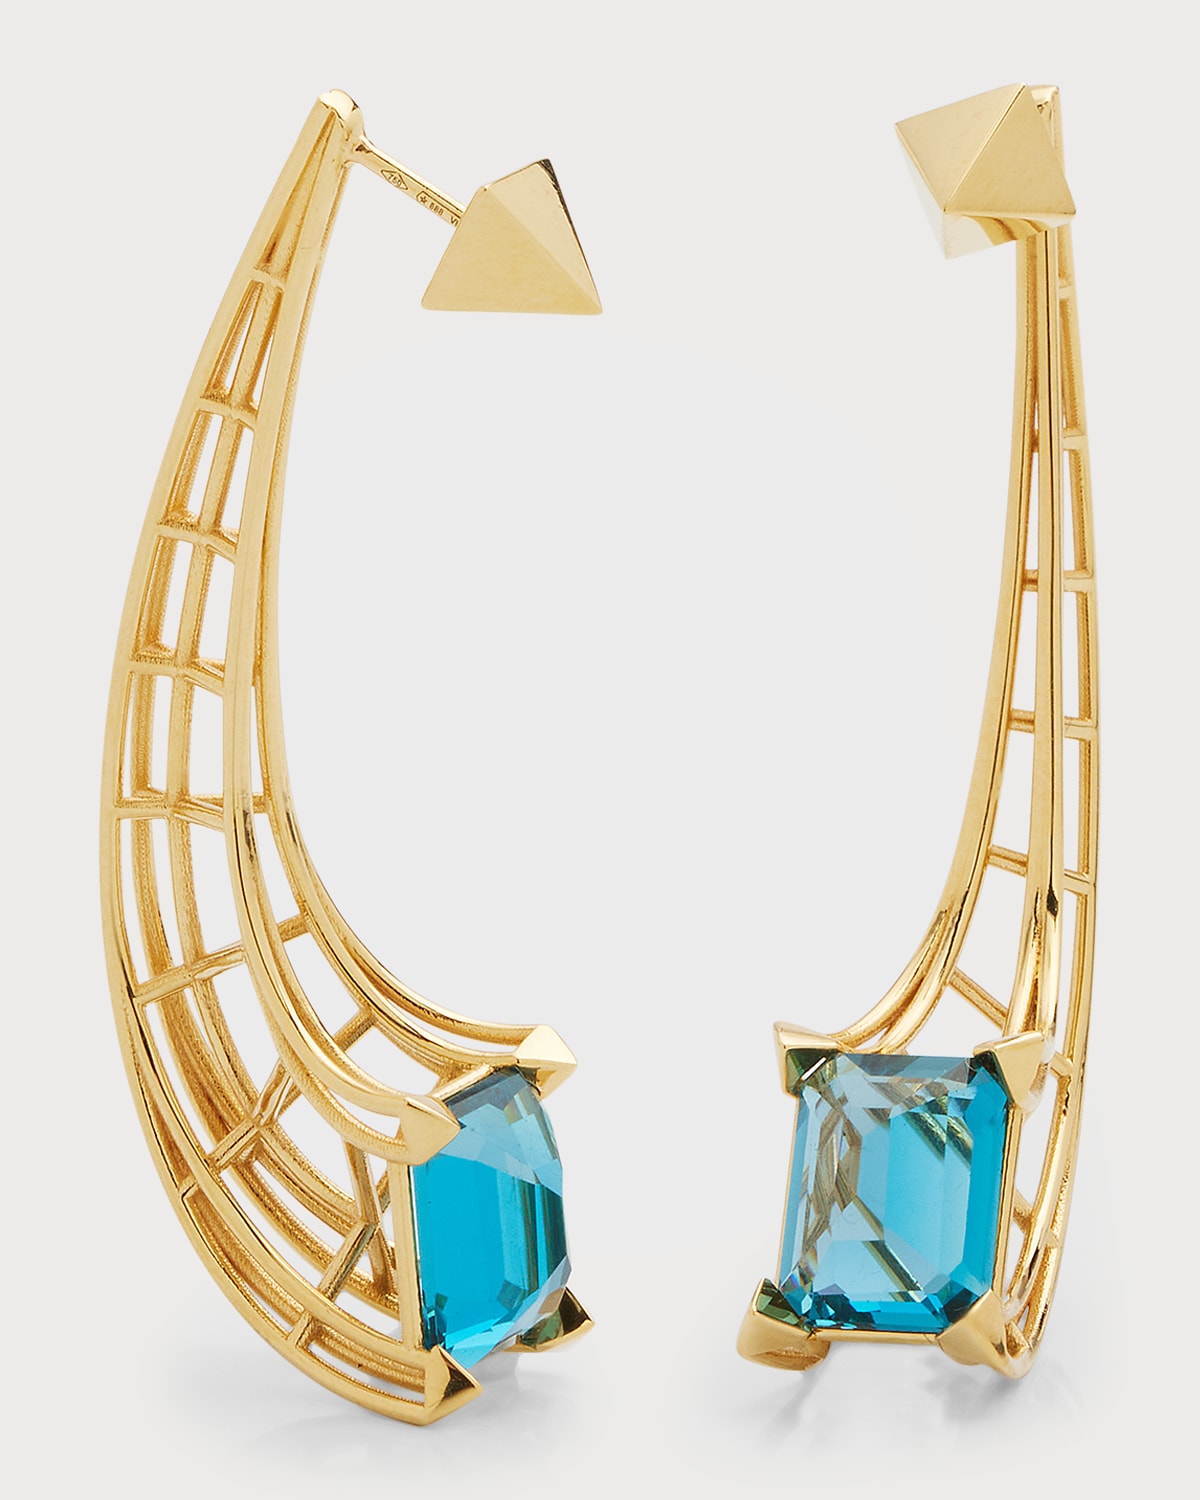 Peruffo 18k Yellow Gold Blue Topaz Caged Earrings